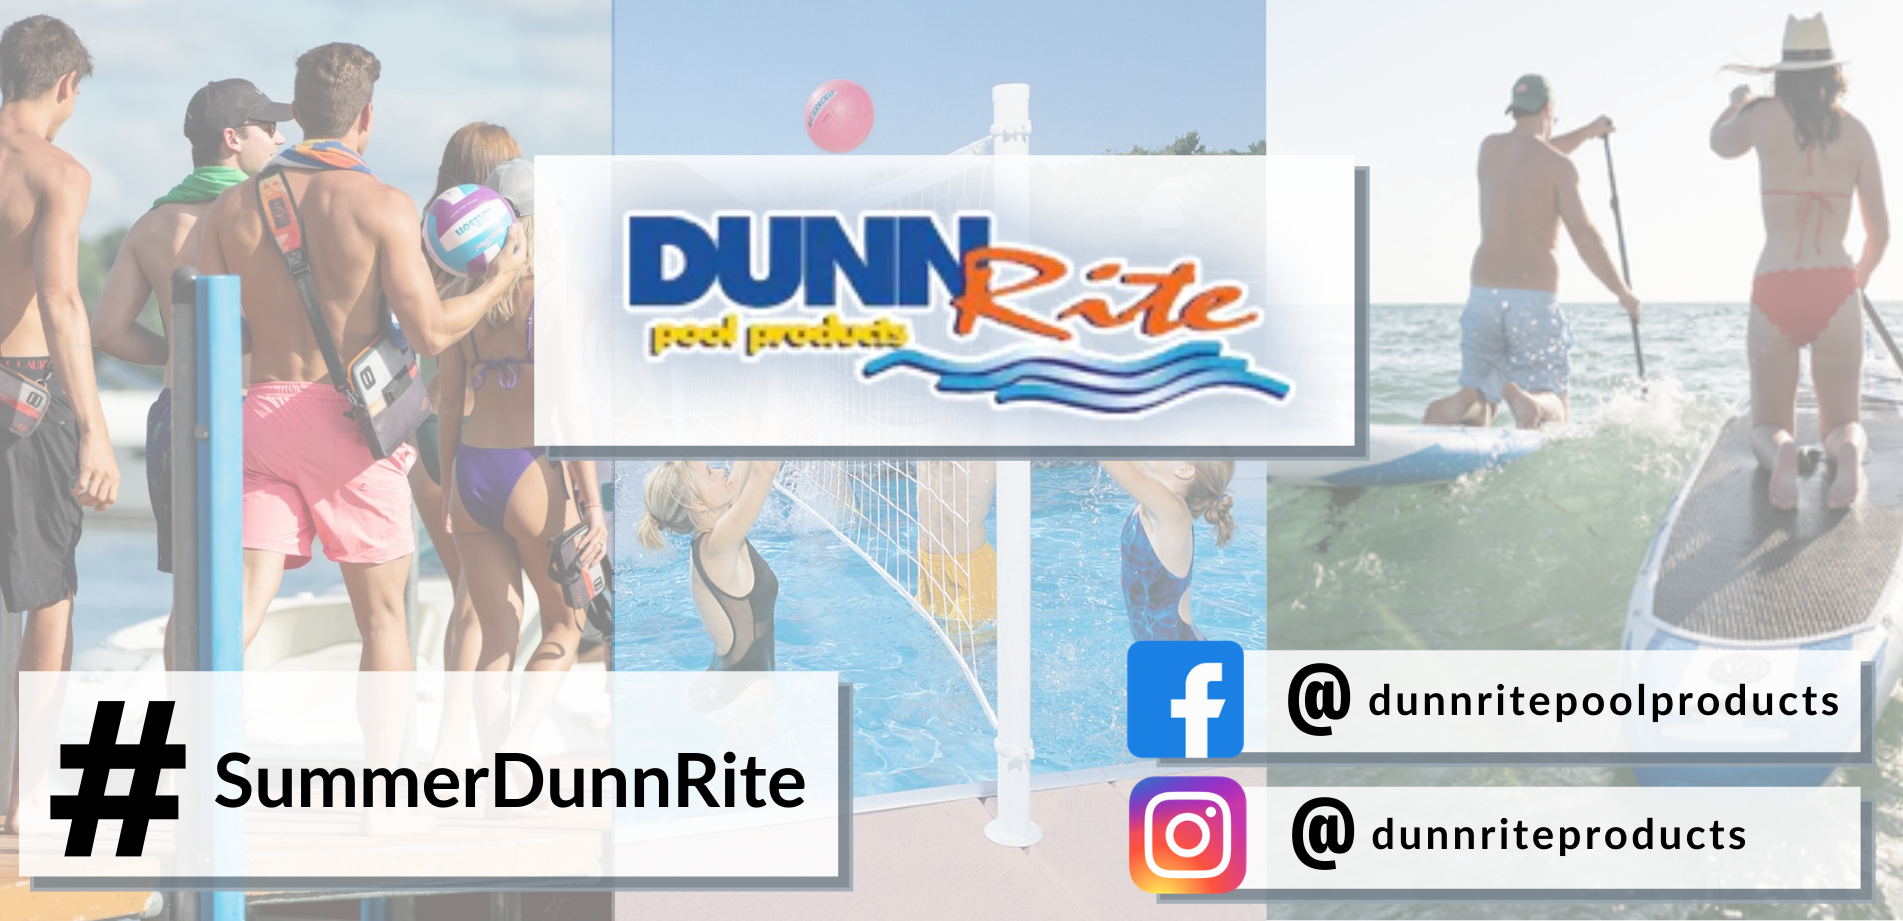 Summerdunnrite Earn Exclusive Coupon Code Dunn Rite Products